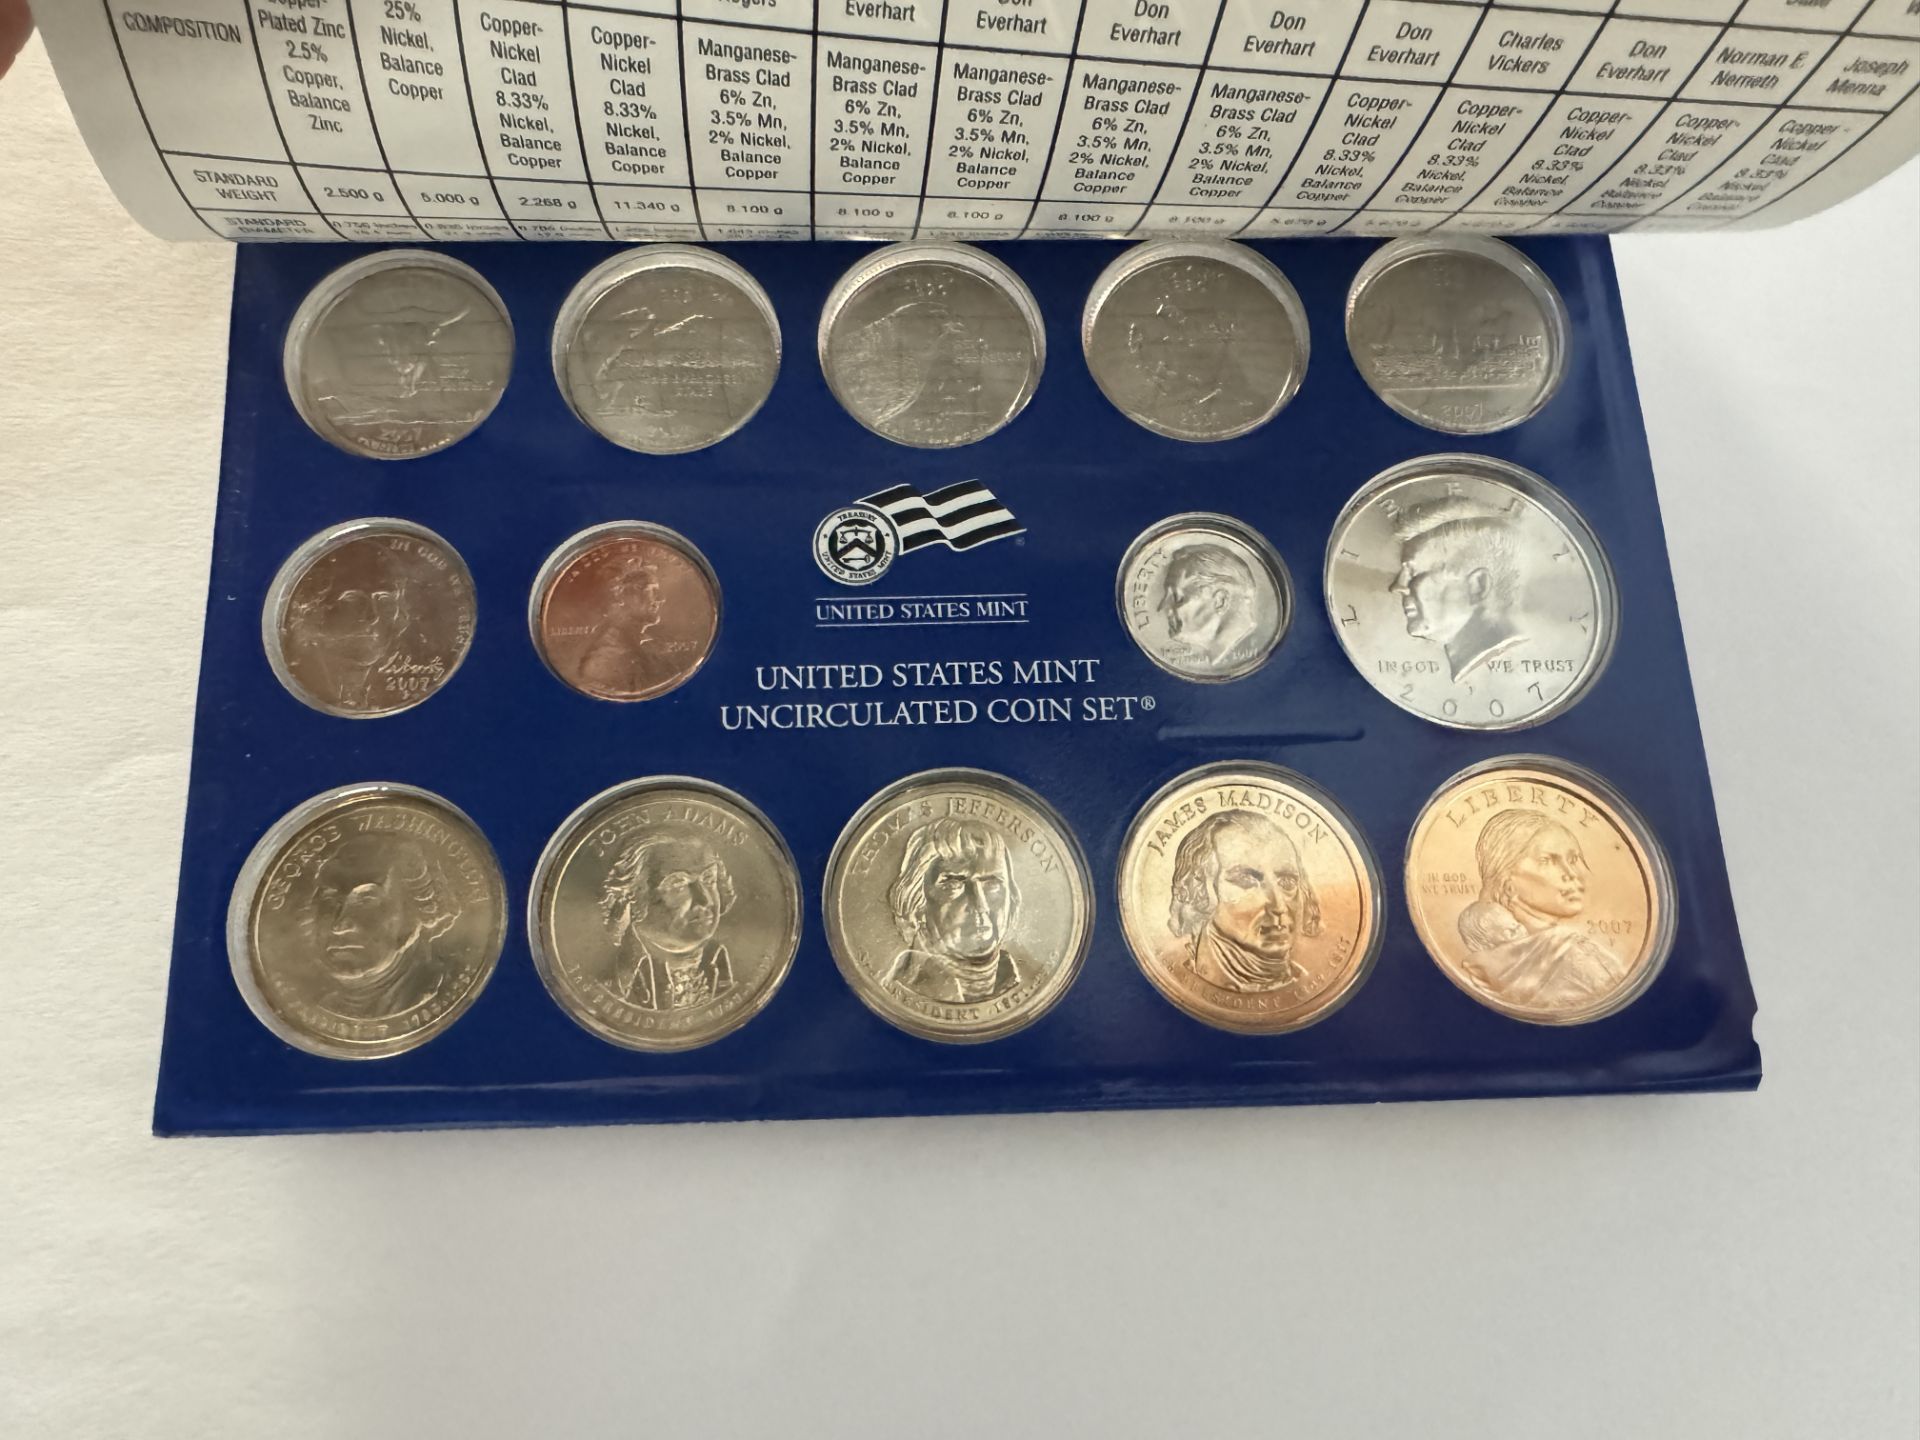 2007 Philadelphia United States Mint Uncirculated Coin Set® - Image 2 of 2